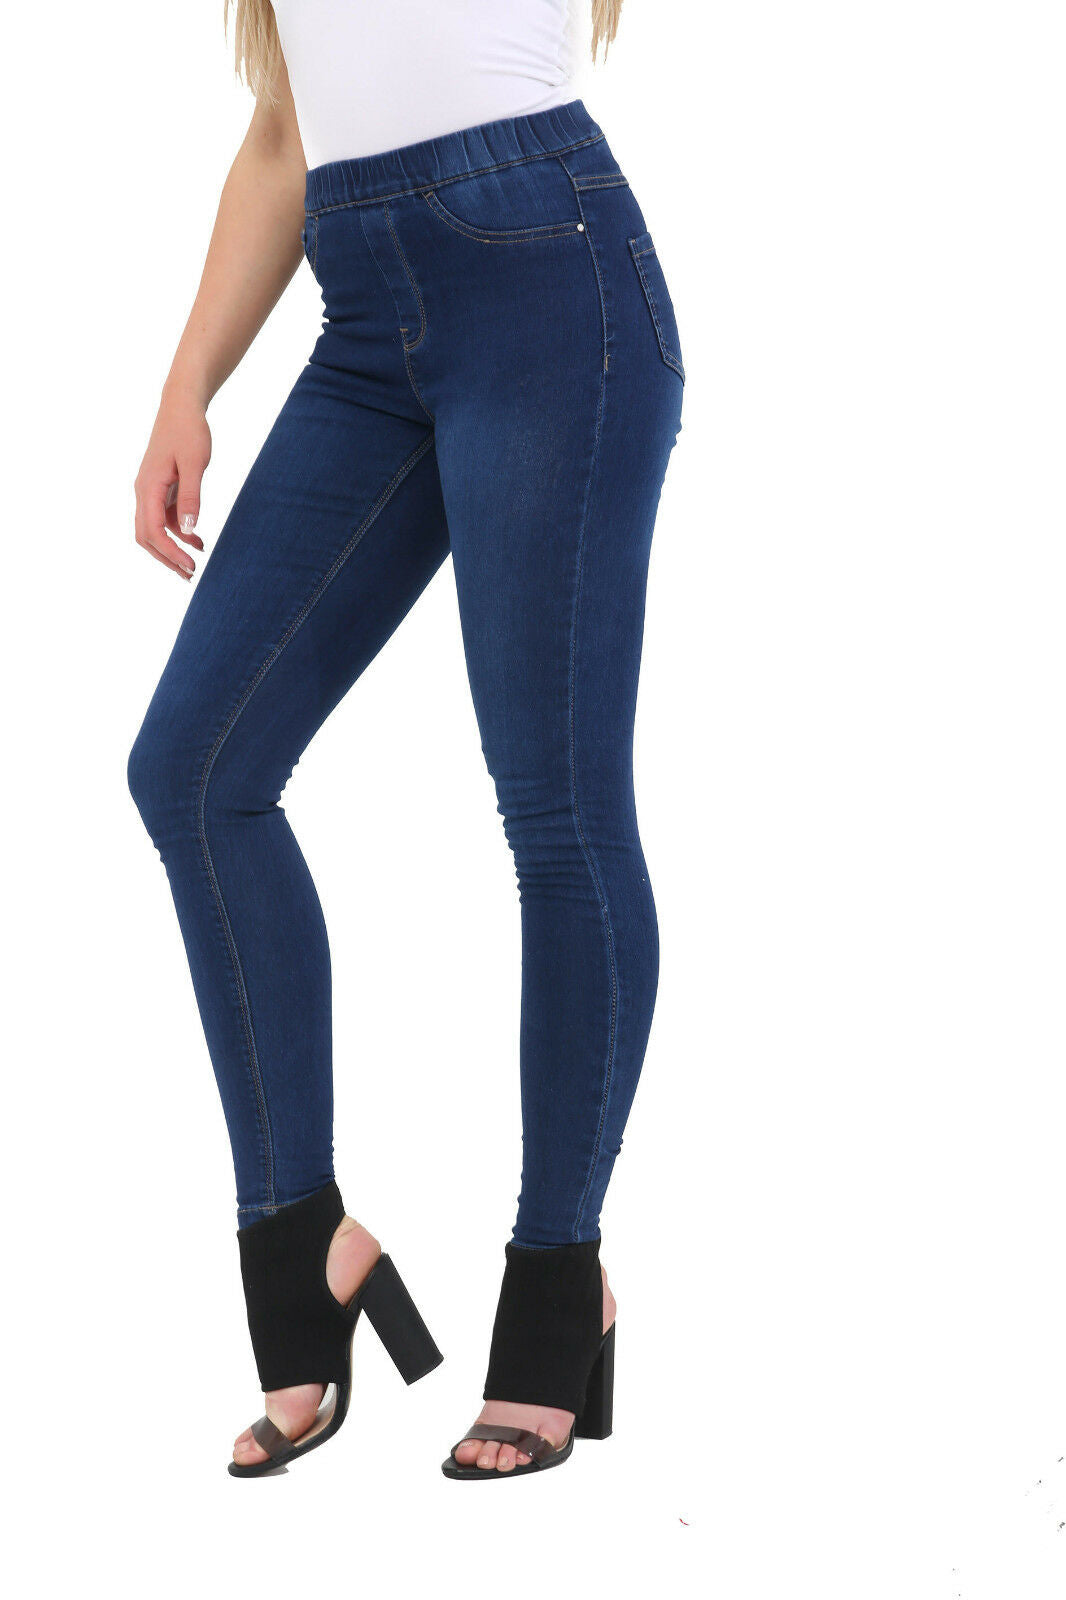 Ladies Dark Blue Denim Jeggings. These Have An Elasticated Waist And Are A Stretchy Fit. Sizes Available Are 20-28